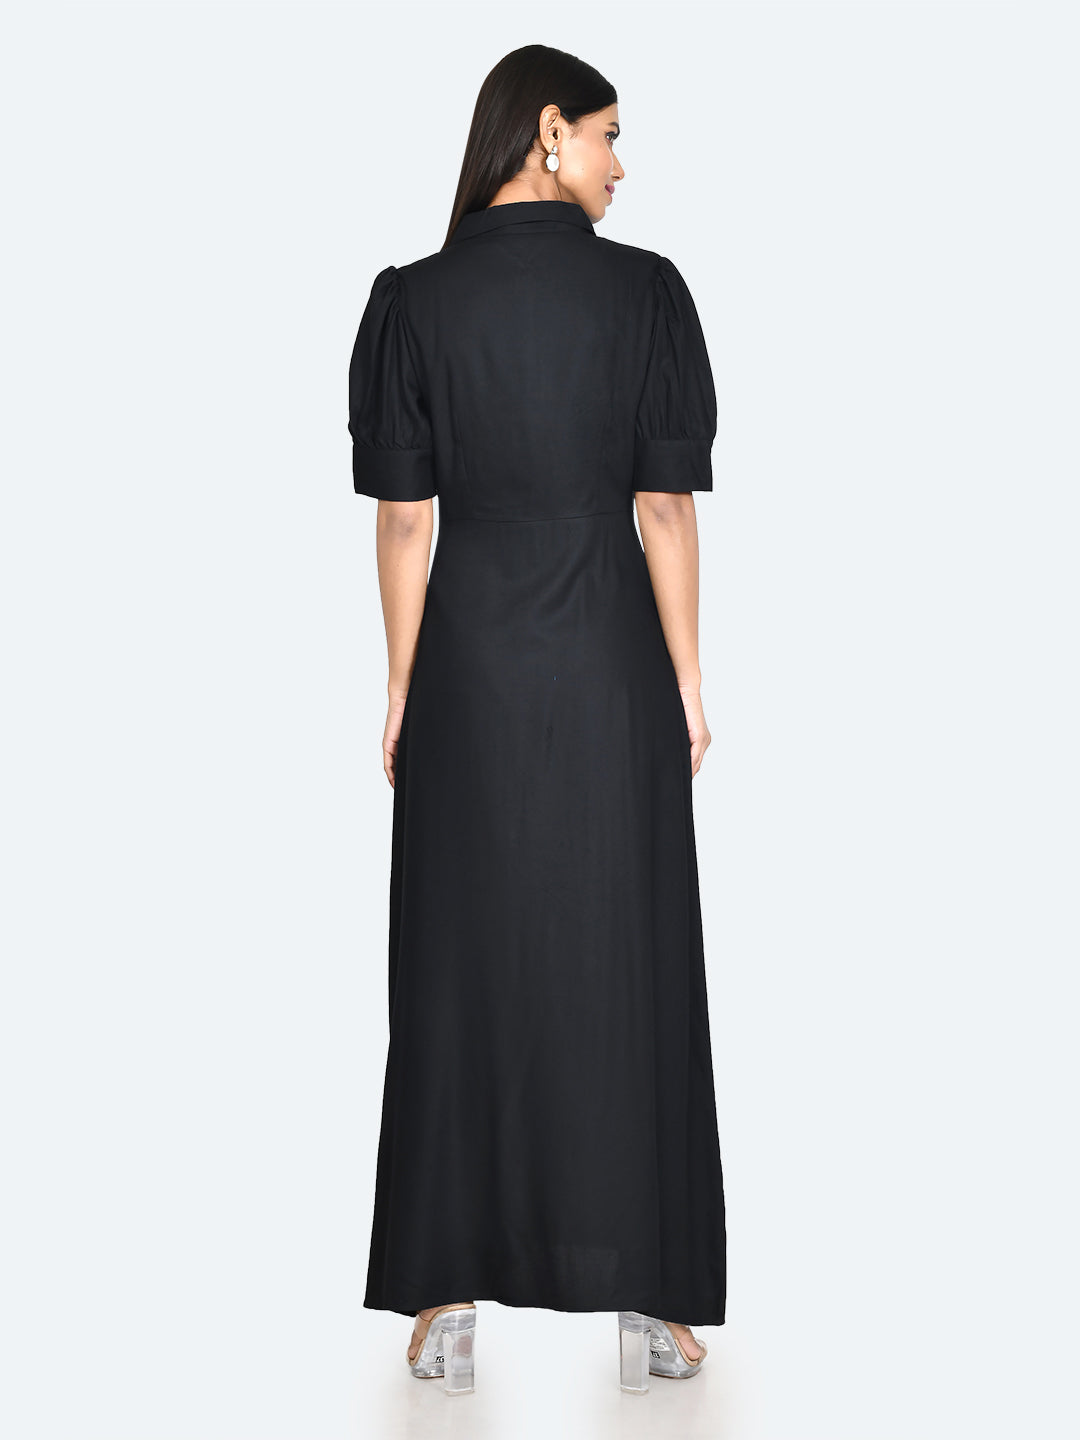 Black Solid Buttoned Maxi Dress For Women